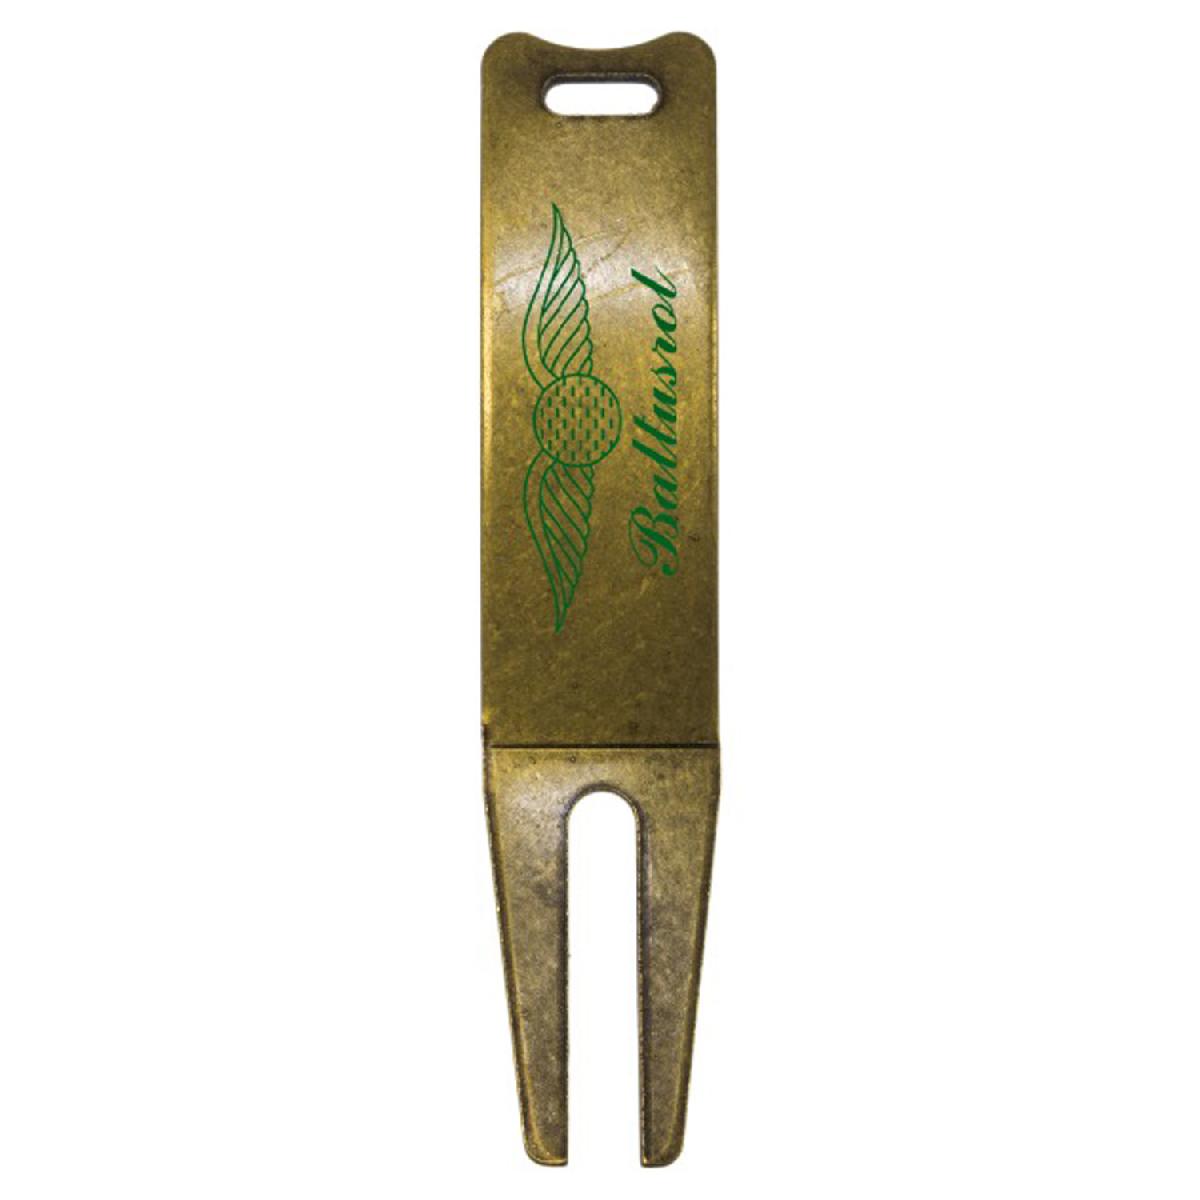 Metal Divot Tool With Wave And Club Rest - Printed Logo